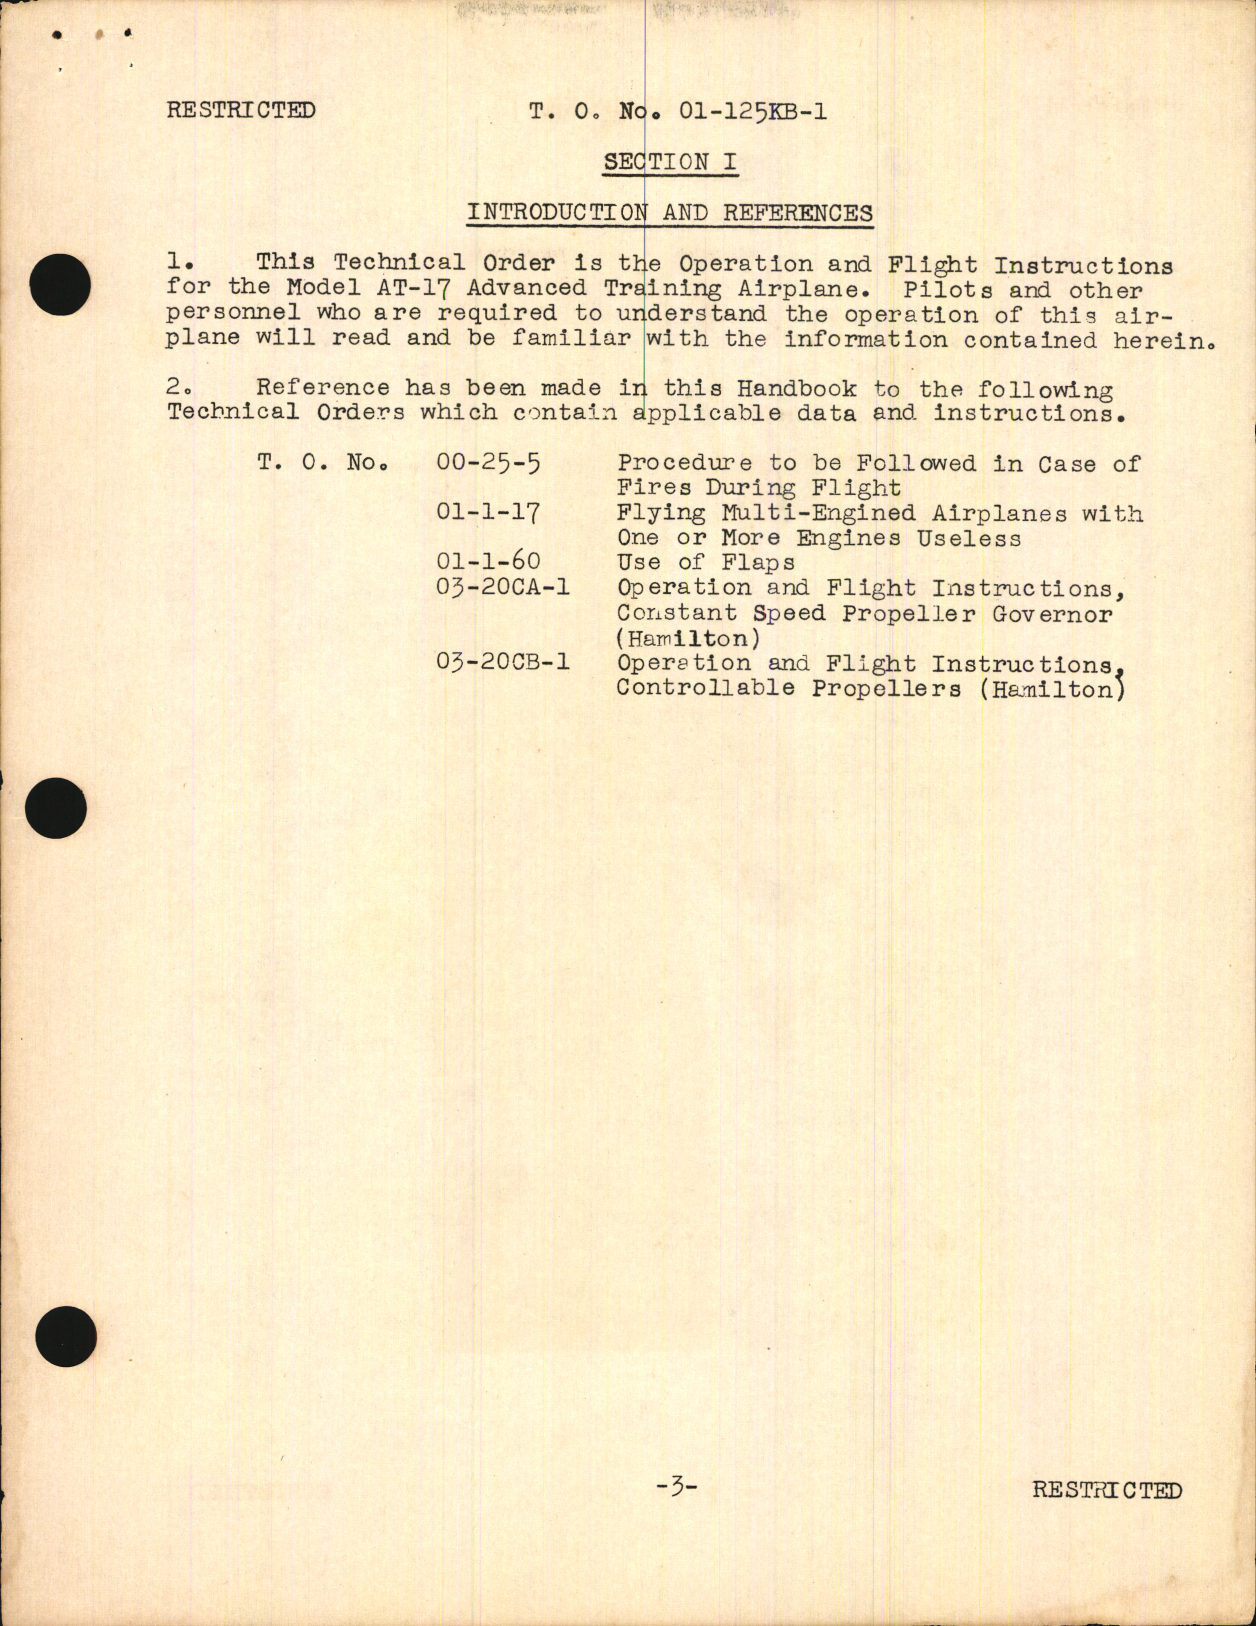 Sample page 7 from AirCorps Library document: Operation and Flight Instructions for Model AT-17 Advanced Training Airplane